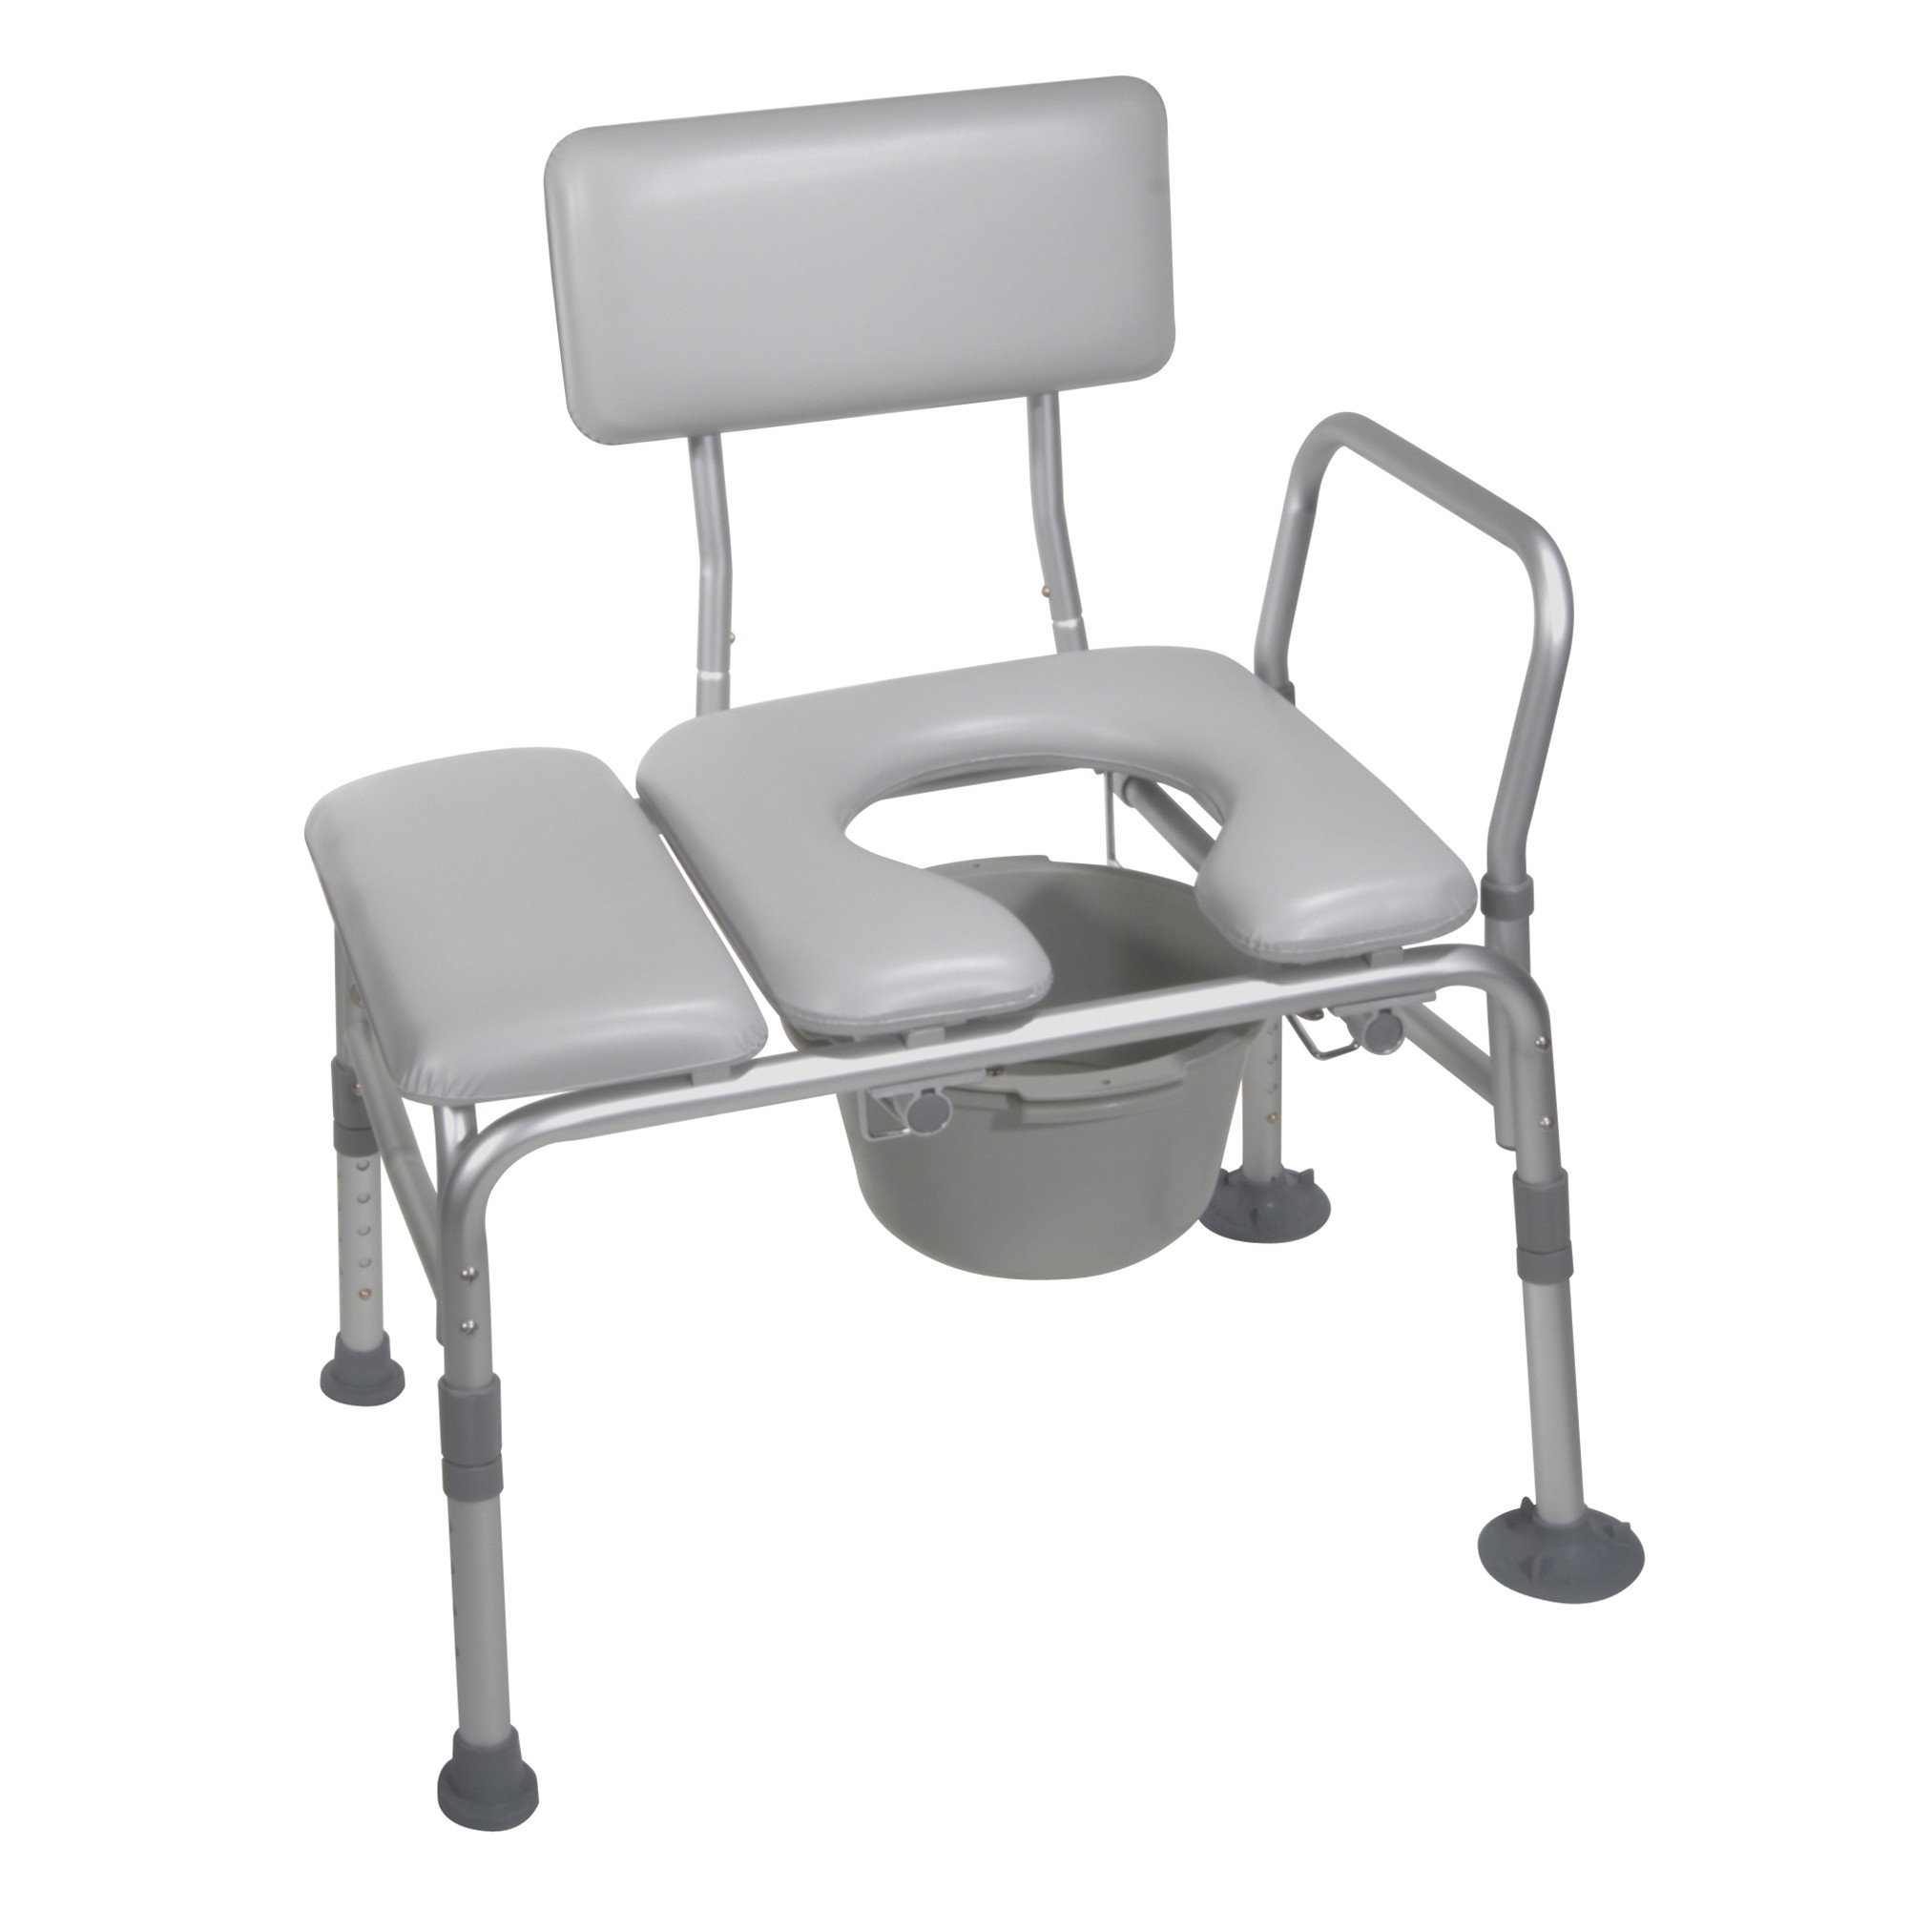 Padded Seat Transfer Bench with Commode Opening | 1800wheelchair